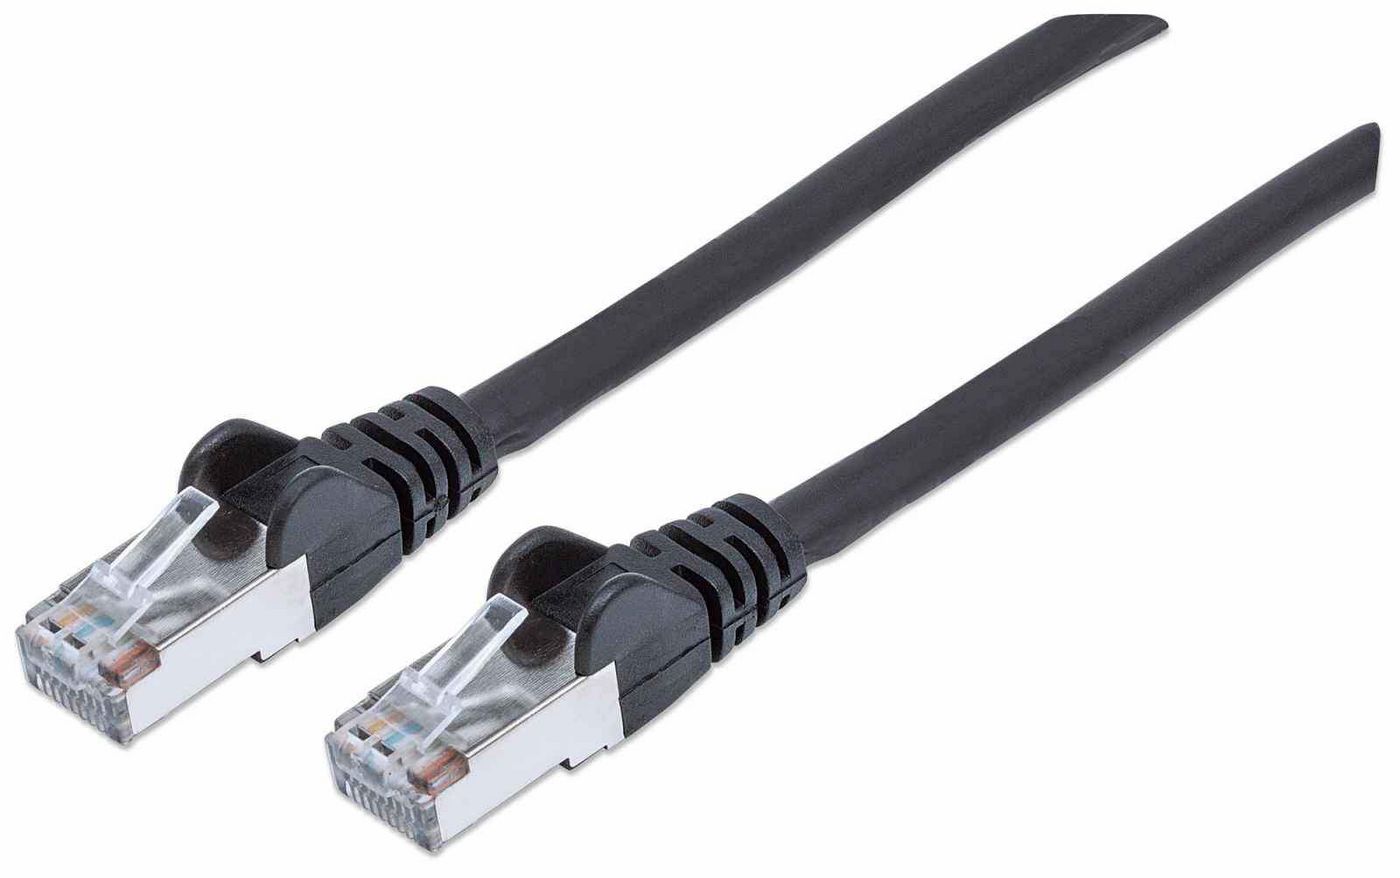 Intellinet 740562 High Performance Network Cable 